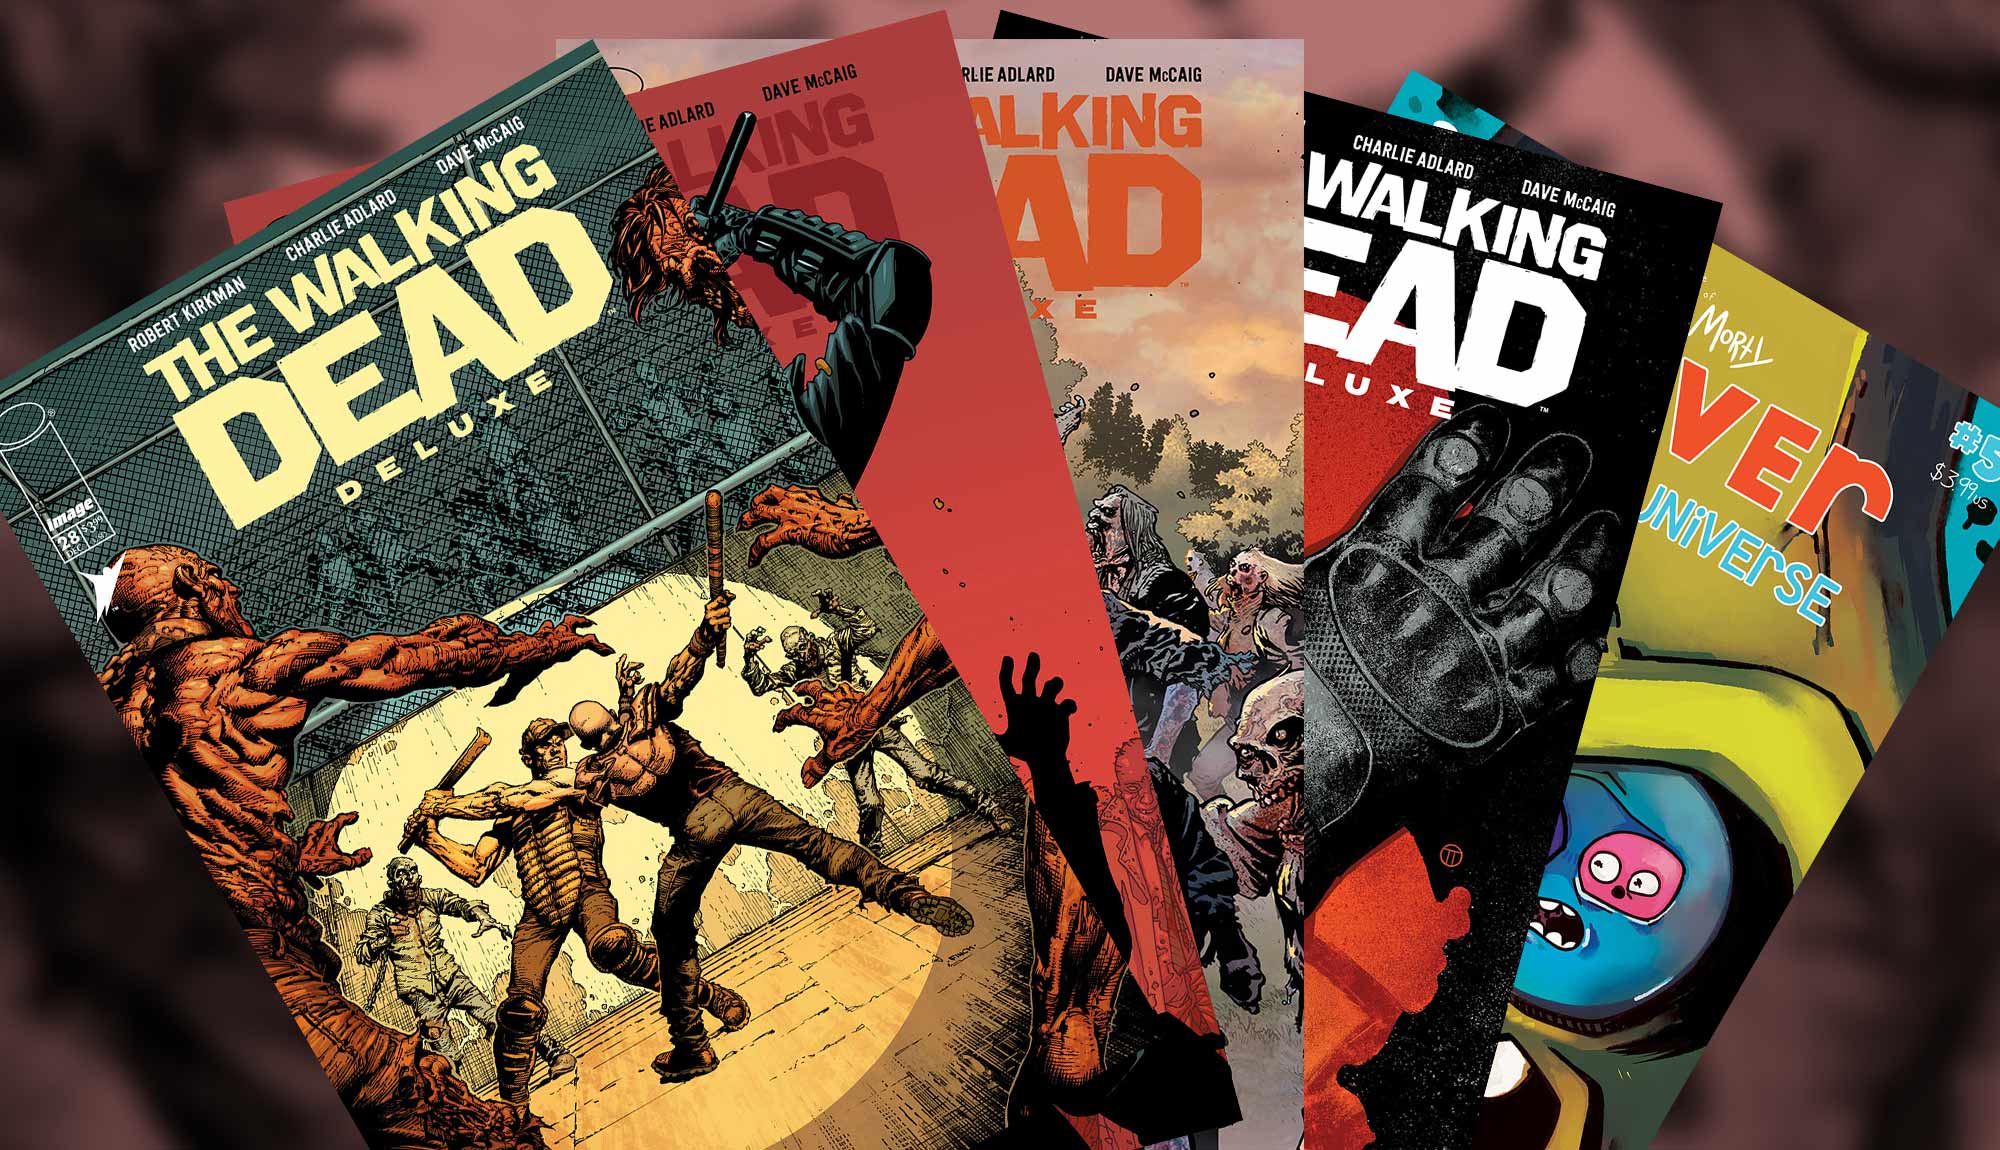 This Week's Comics: The Walking Dead Deluxe and Trover Saves The Universe